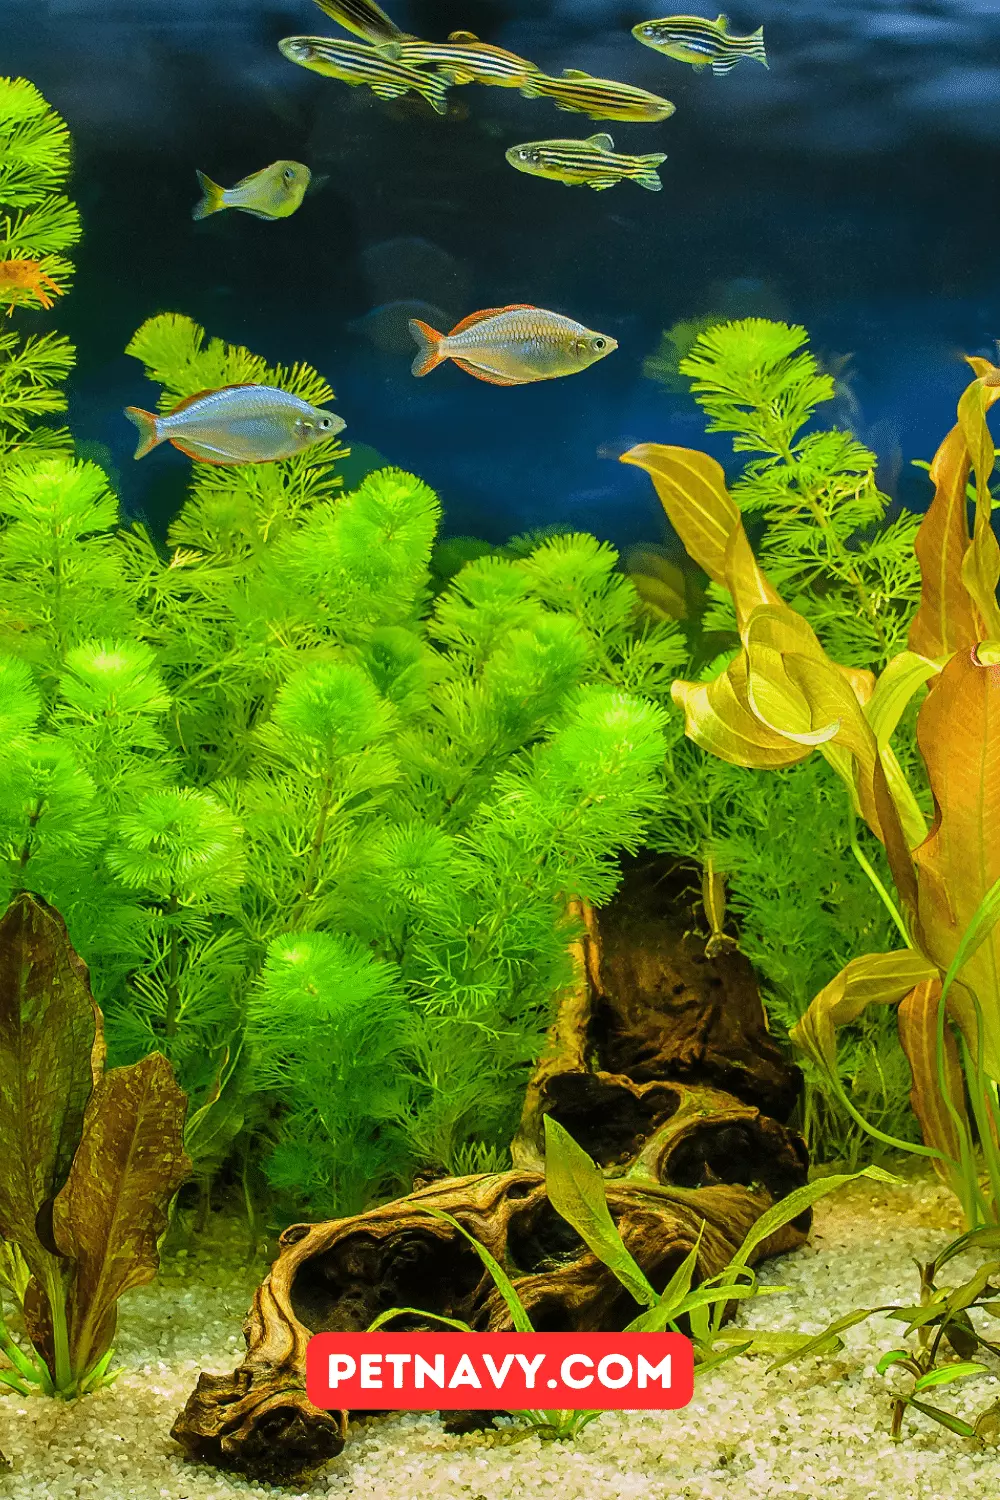 5 Tips on How to Choose the Best Aquarium Heater